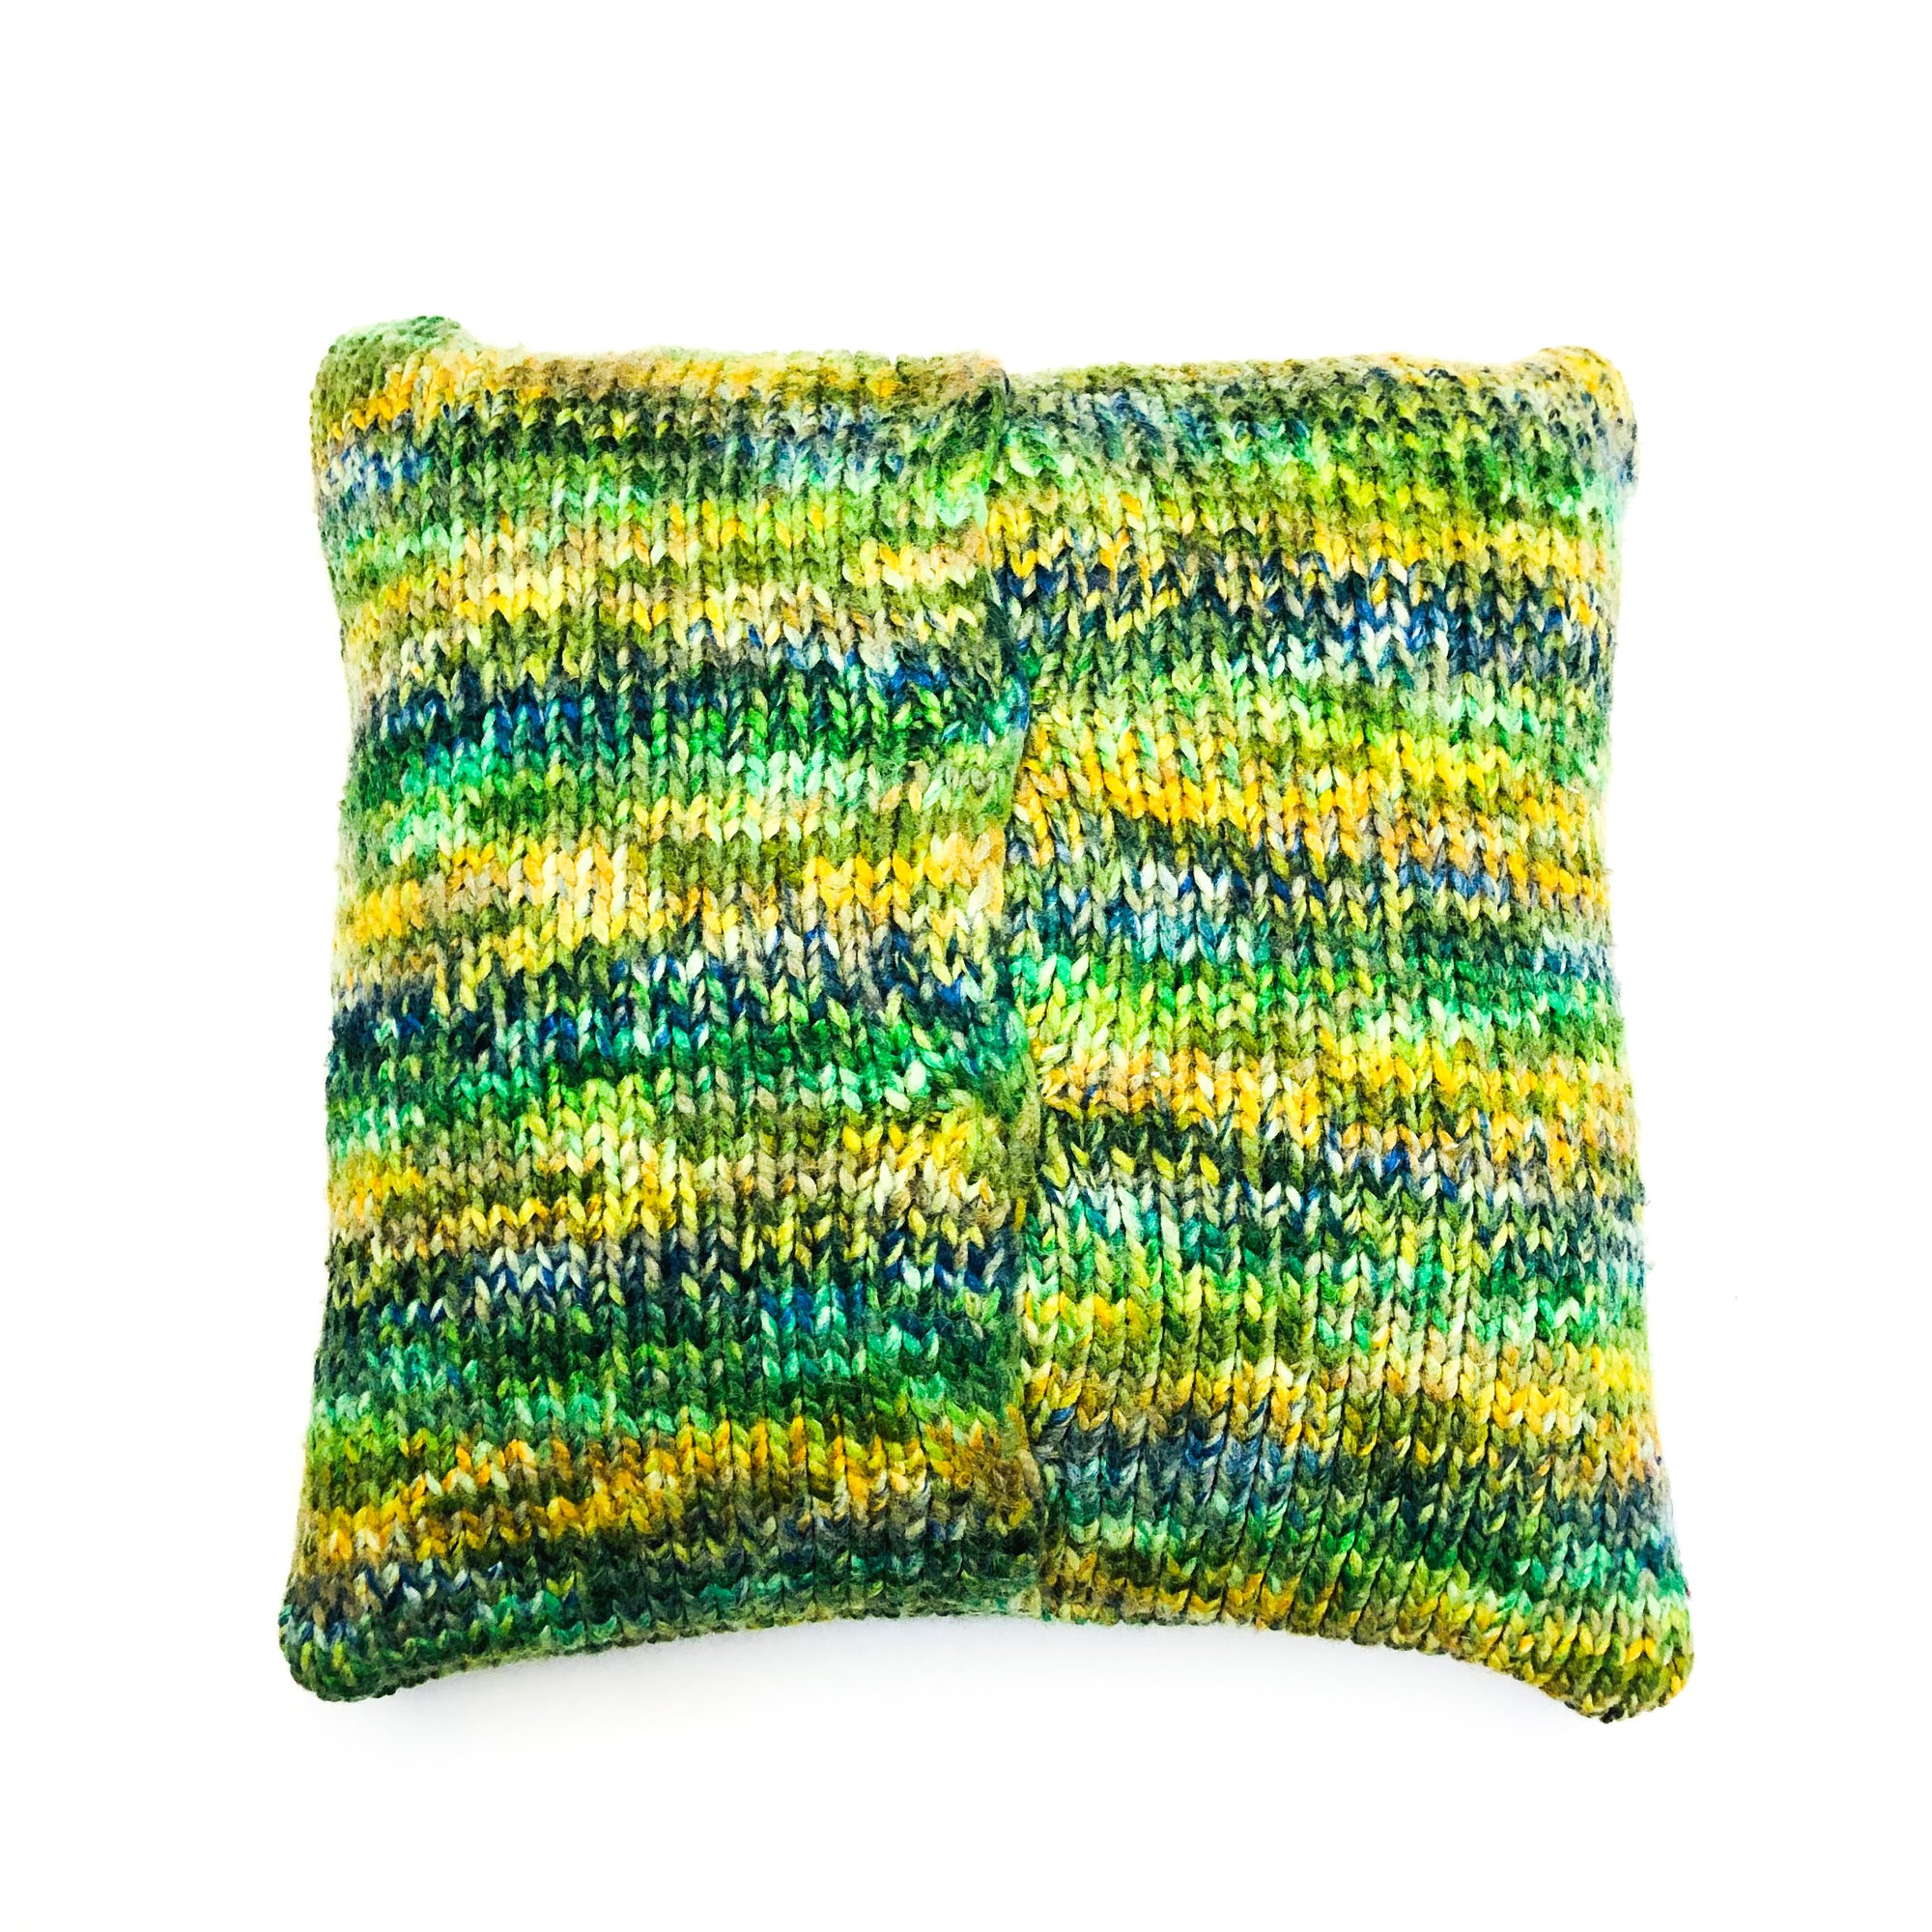 14 x 14  Wool Pillow Cover